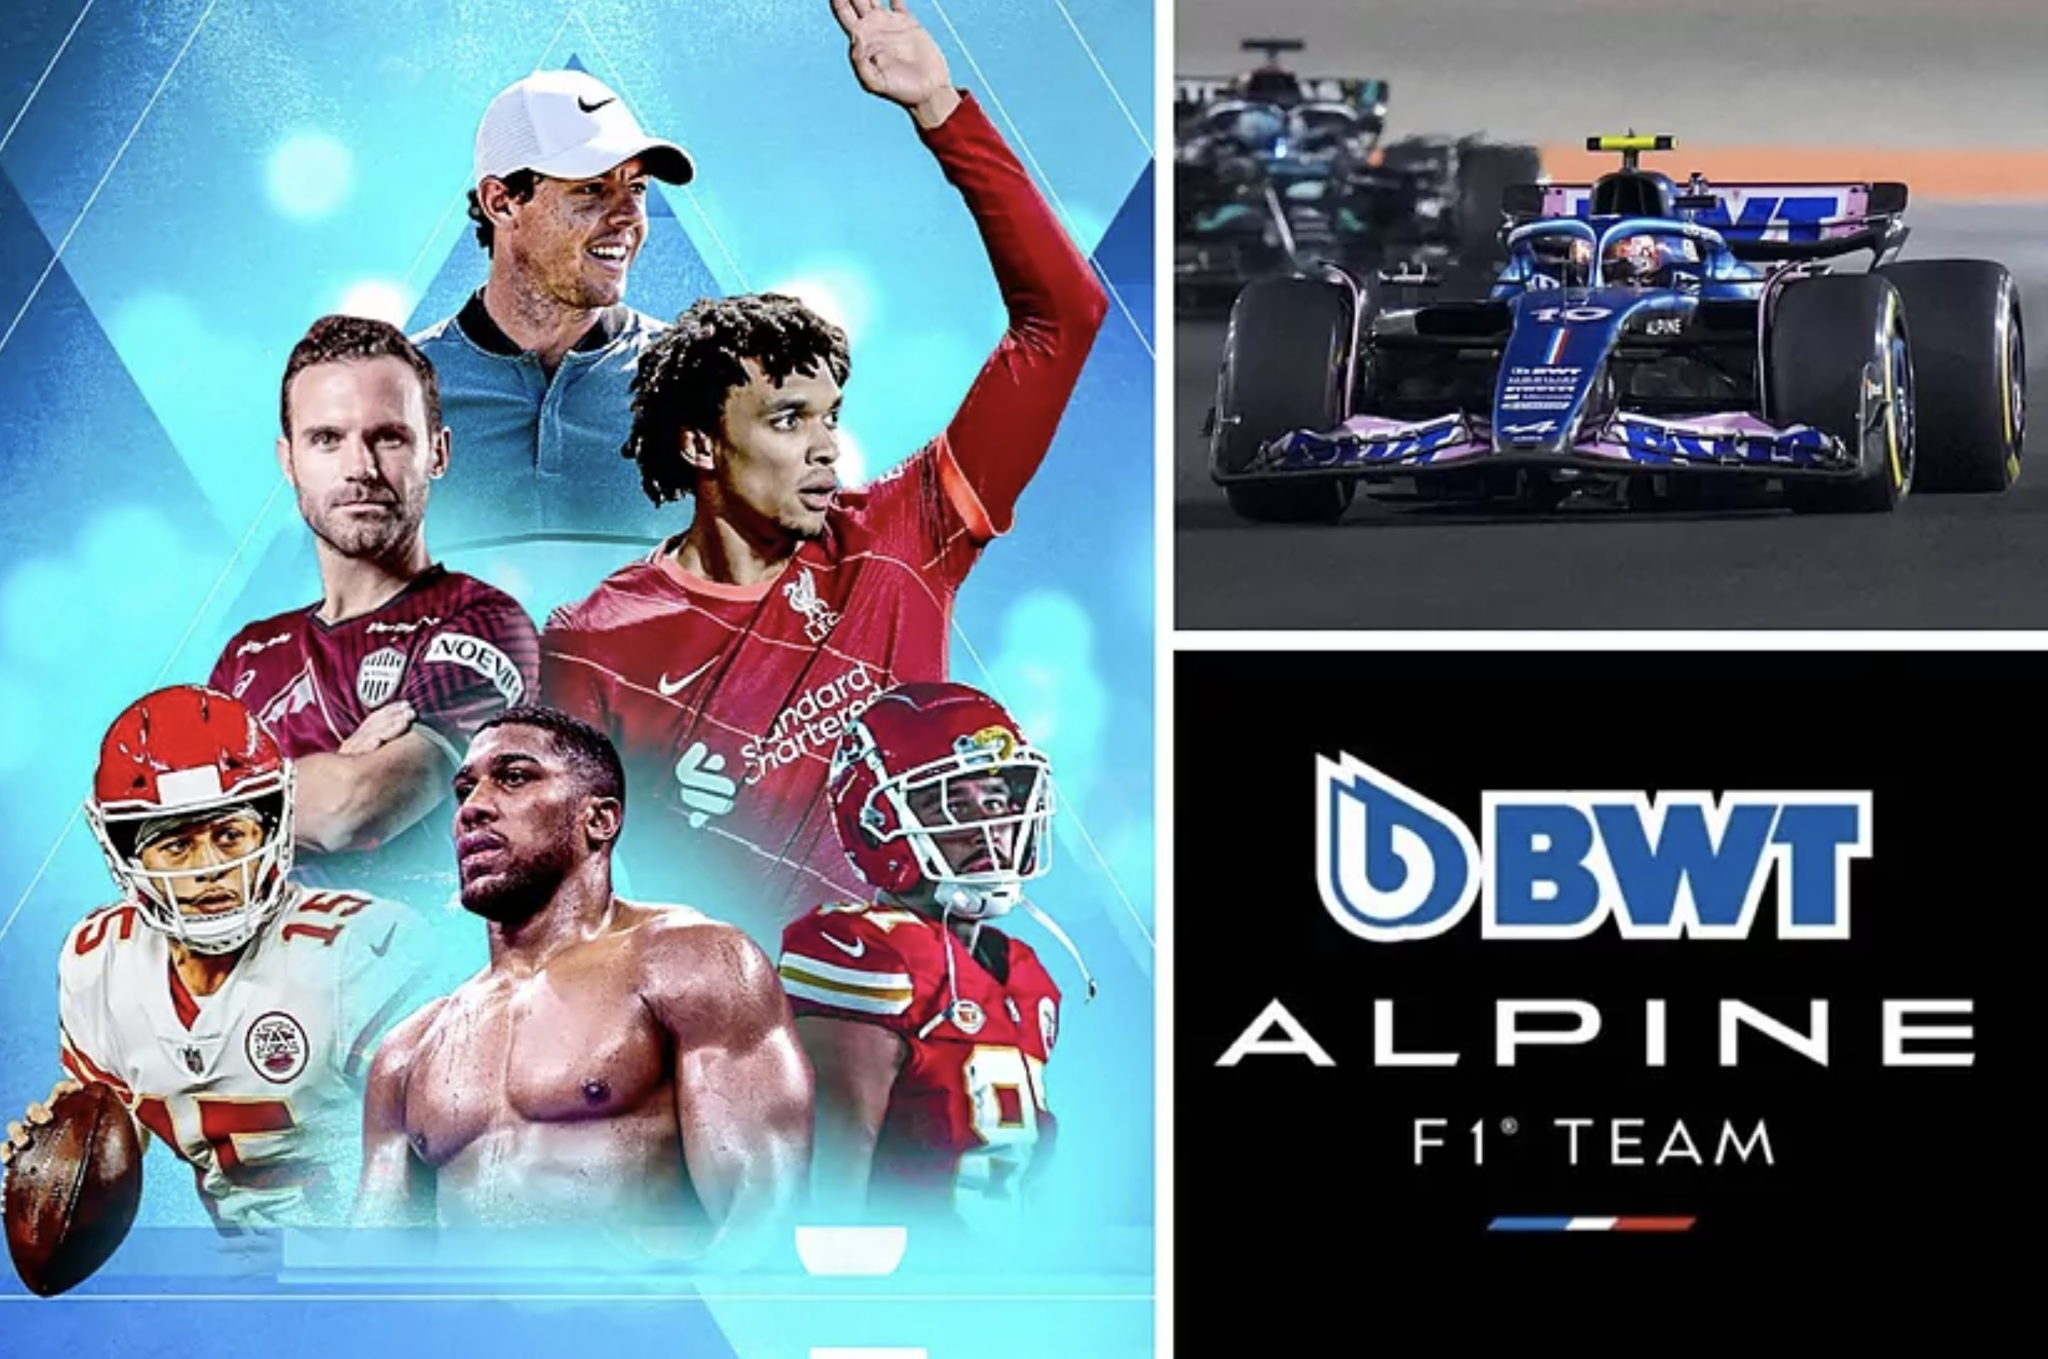 Alpine F1 sells shares to Patrick Mahomes, Travis Kelce and other sportsmen